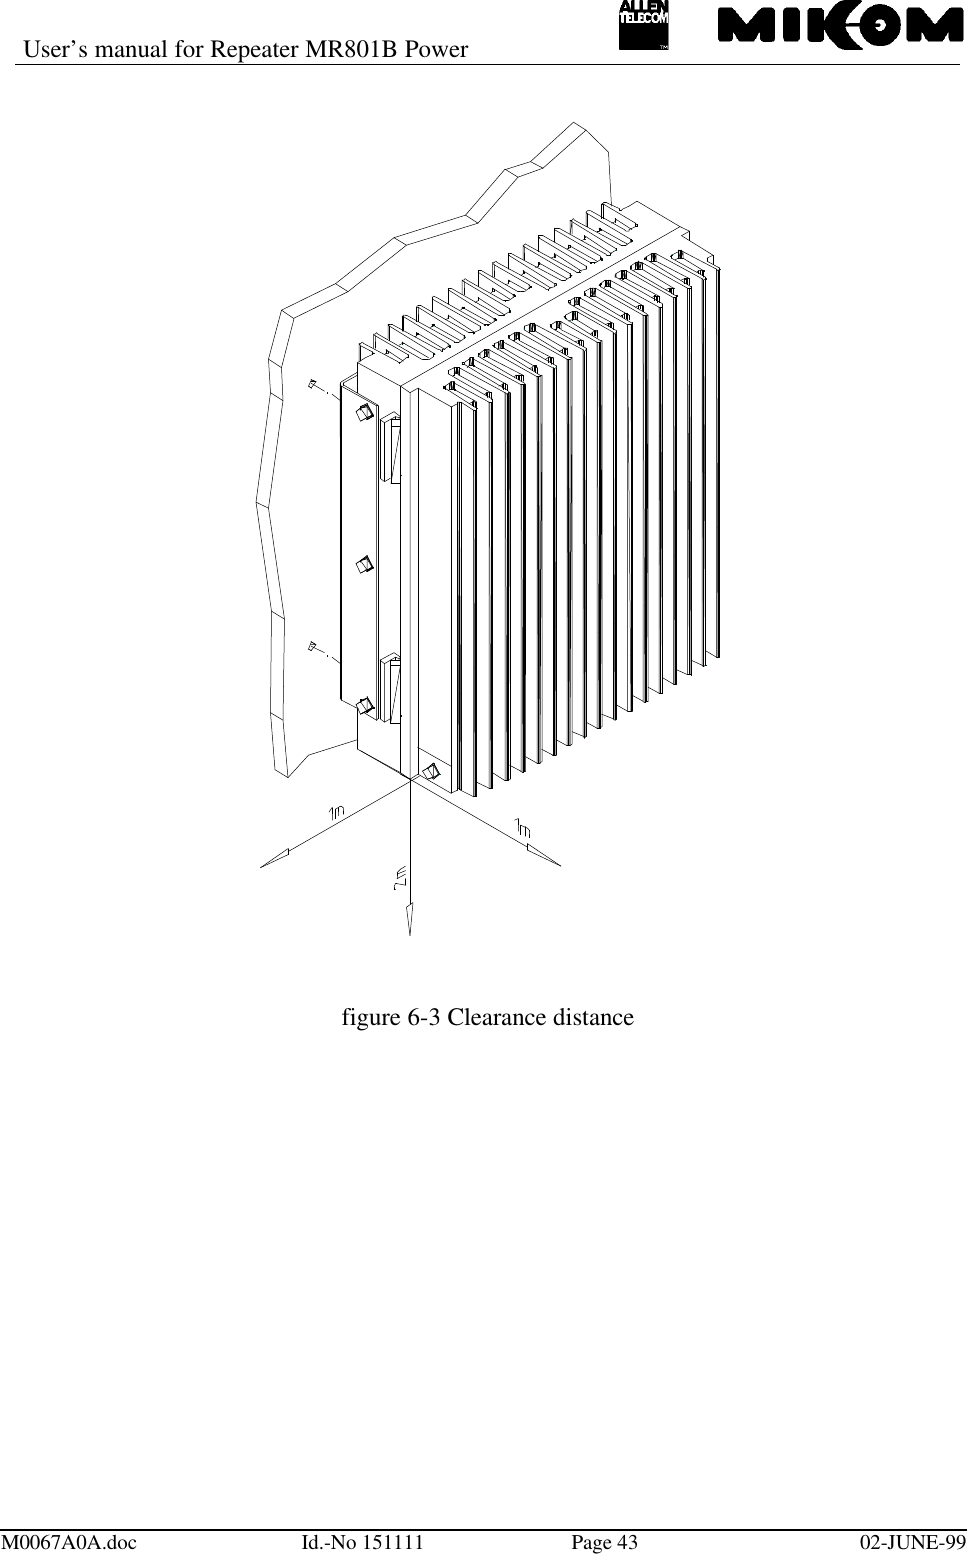 User’s manual for Repeater MR801B PowerM0067A0A.doc Id.-No 151111 Page 43 02-JUNE-99figure 6-3 Clearance distance